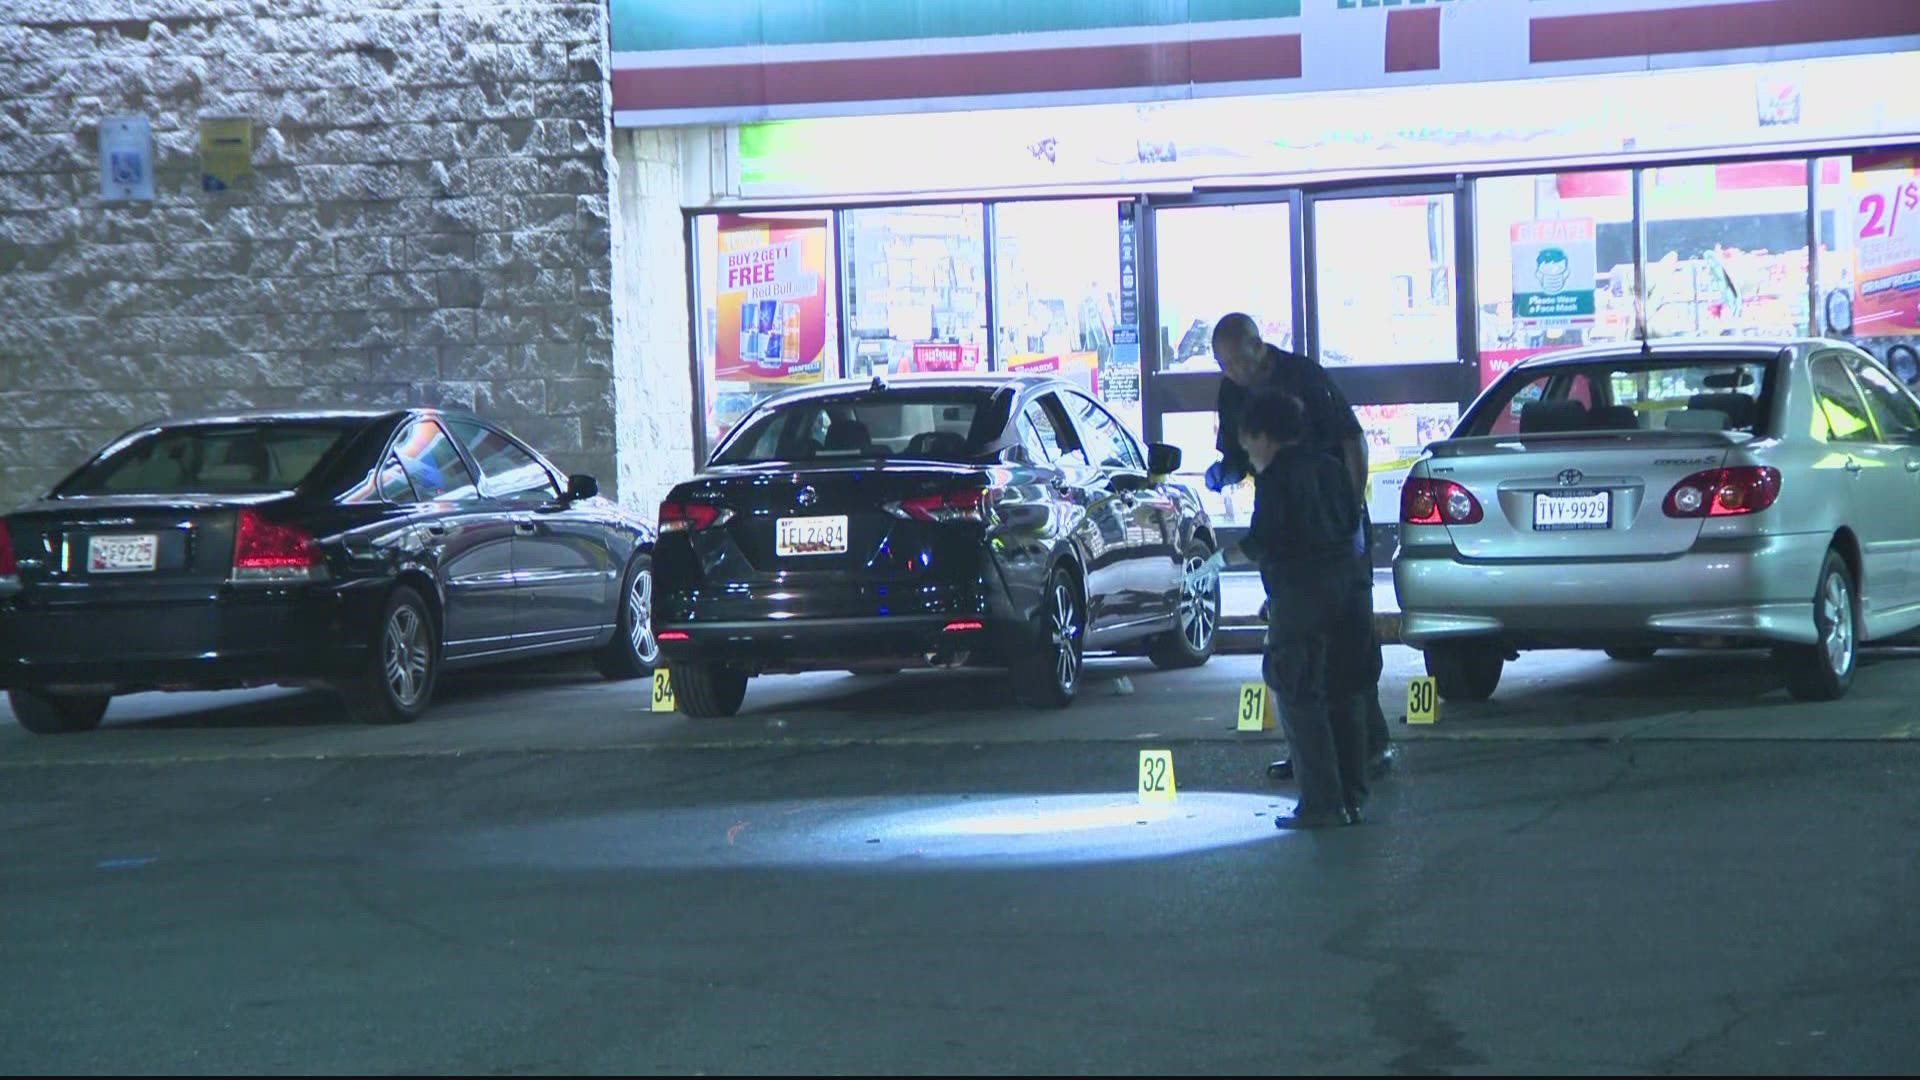 Police say a man is dead and multiple people are hurt after a shooting at a 7-Eleven in Capitol Heights.